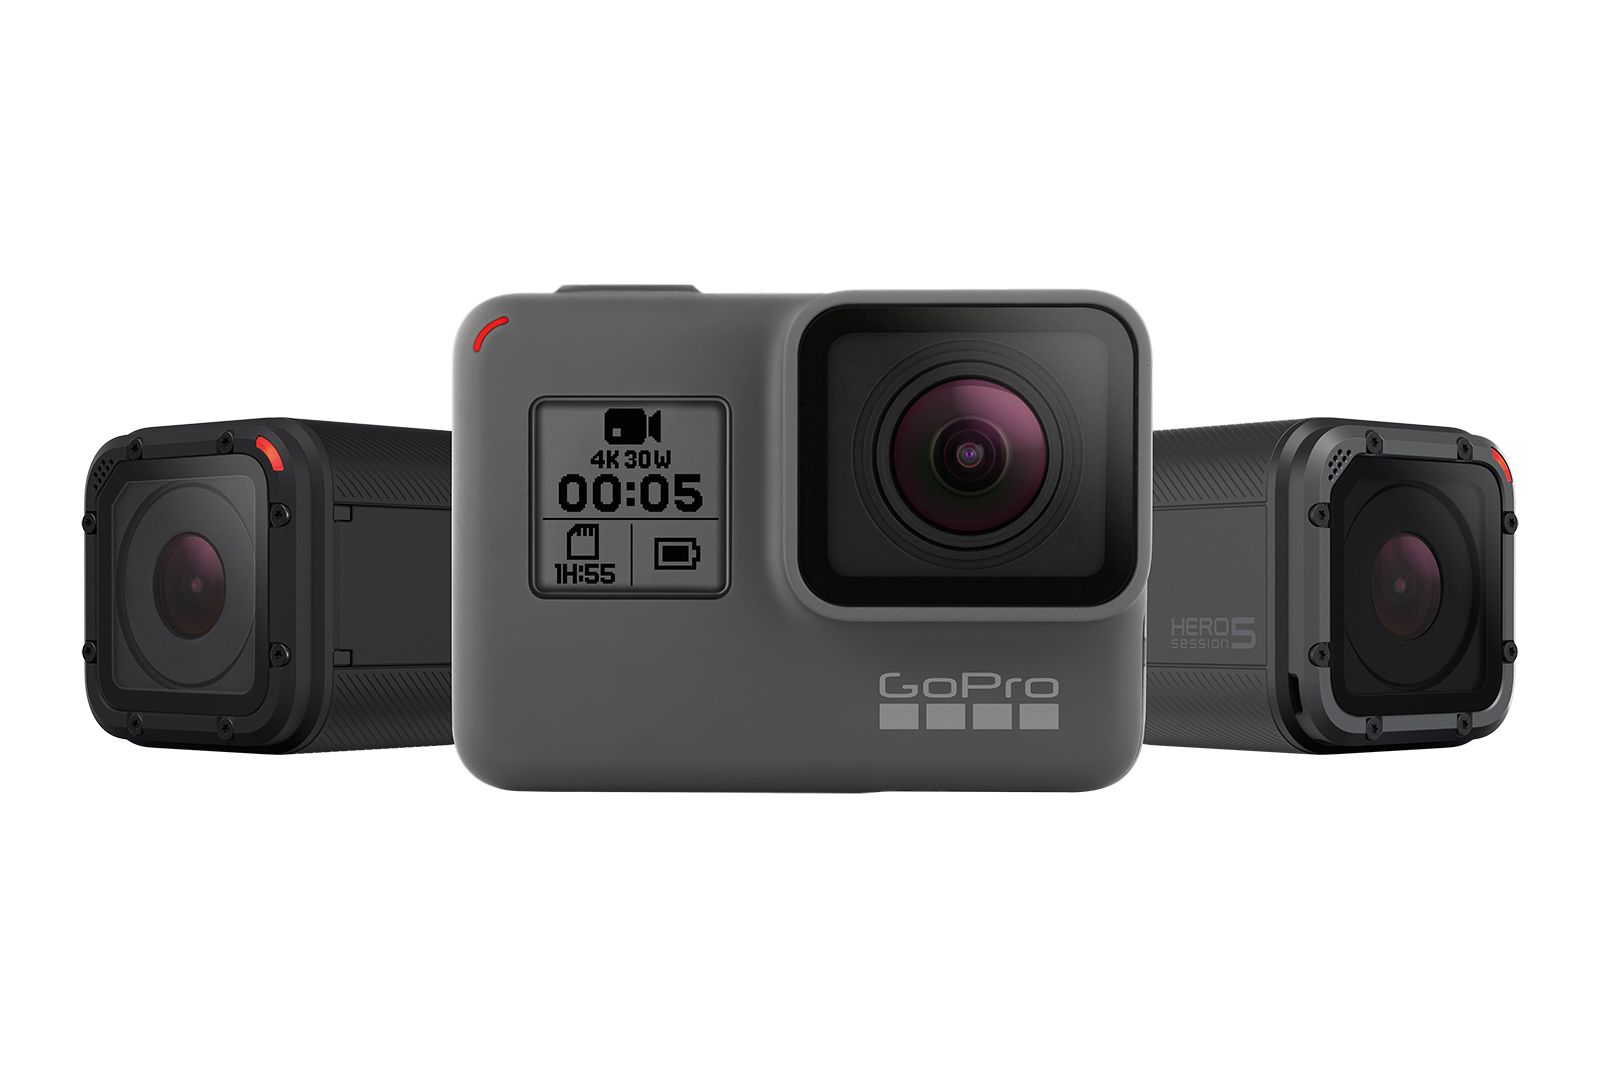 GoPro Hero 5 Black and Session cameras 4K video with GPS and waterproofing